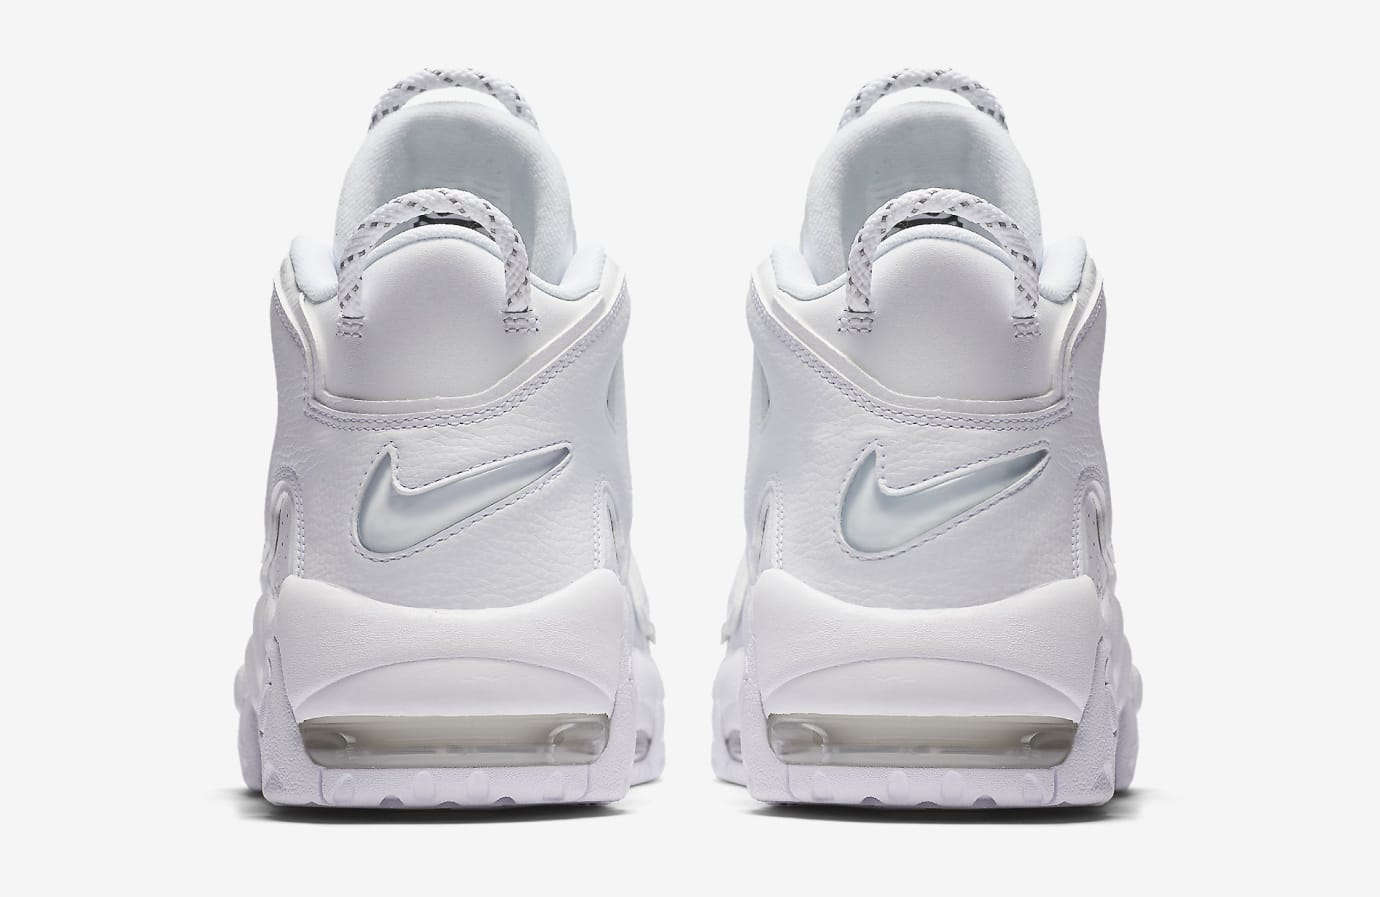 Triple White Nike Air More Uptempo 921948-100 | Sole Collector